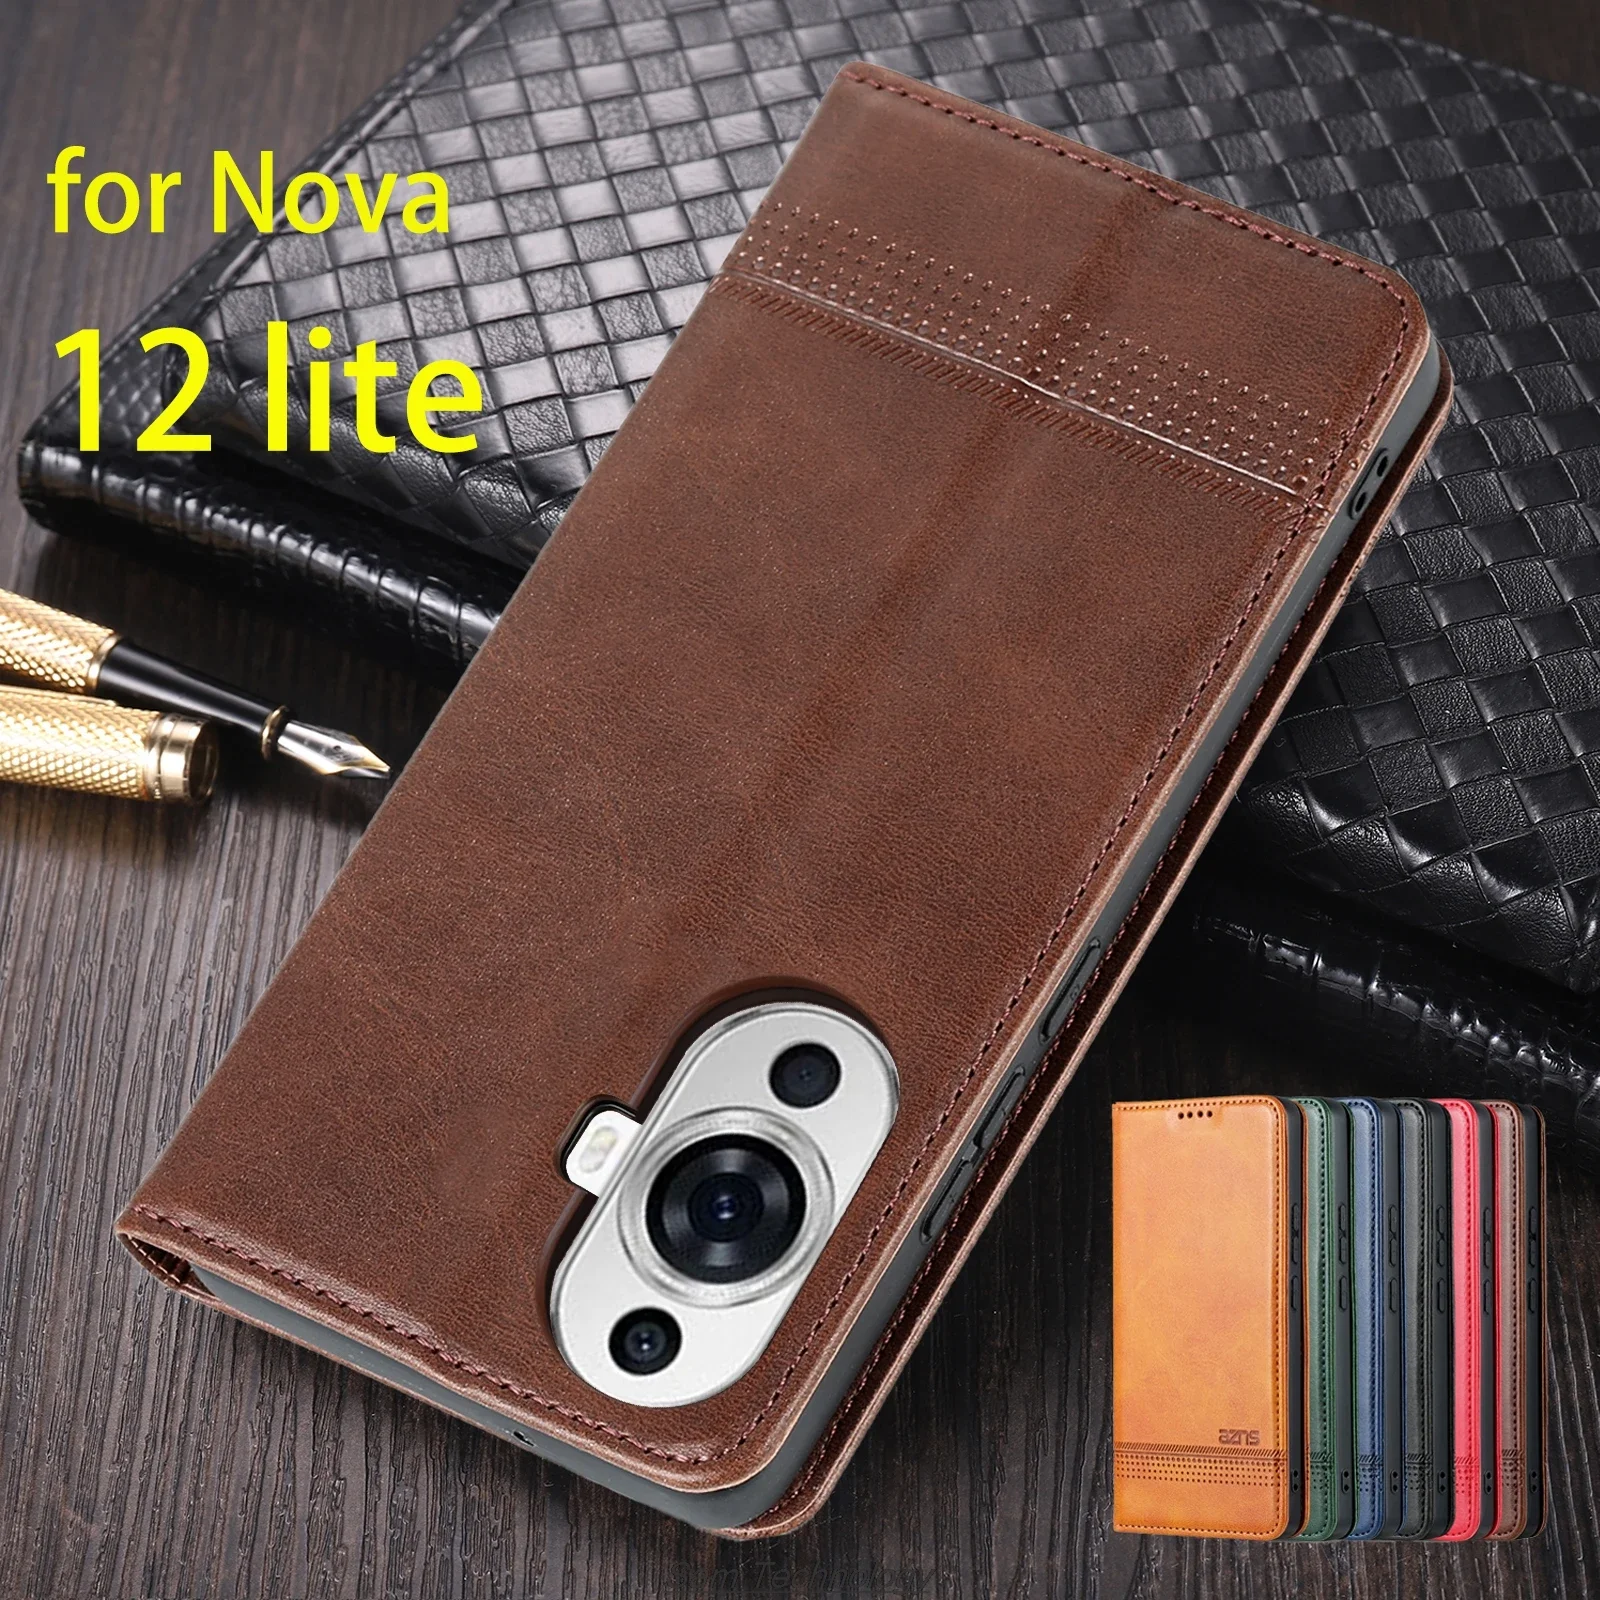 

Deluxe Magnetic Adsorption Leather Fitted Case for Huawei Nova 12 lite 4G Flip Cover Protective Case Capa Fundas Coque